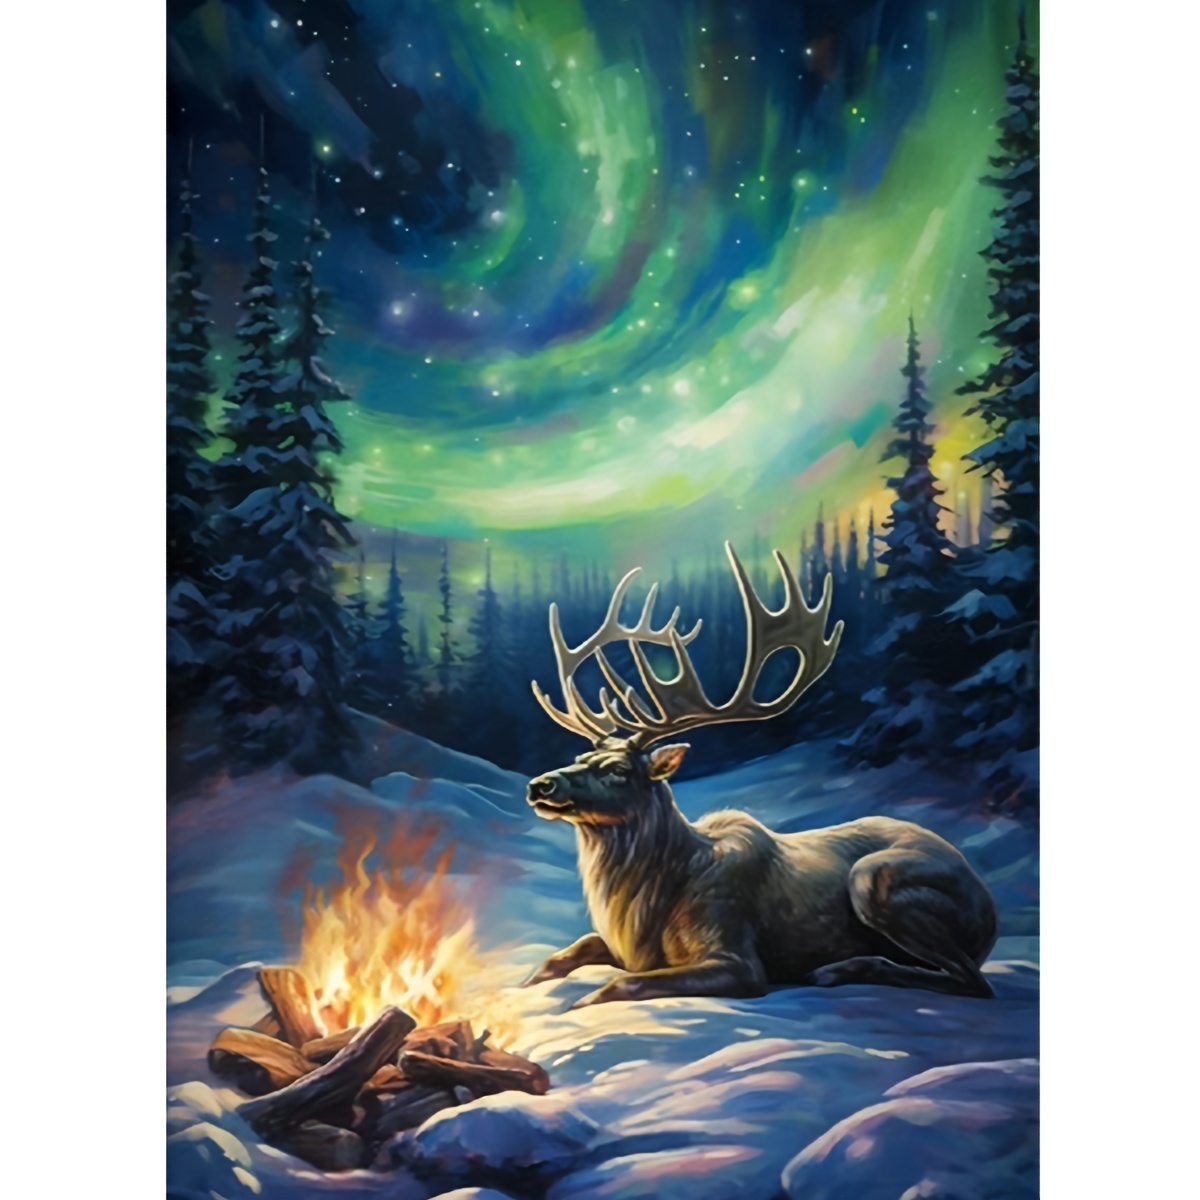  Mimik Deer Diamond Painting,Paint by Diamonds for Adults,  Diamond Art with Accessories & Tools,Wall Decoration Crafts,Relaxation and  Home Wall Decor 8x12 Inch